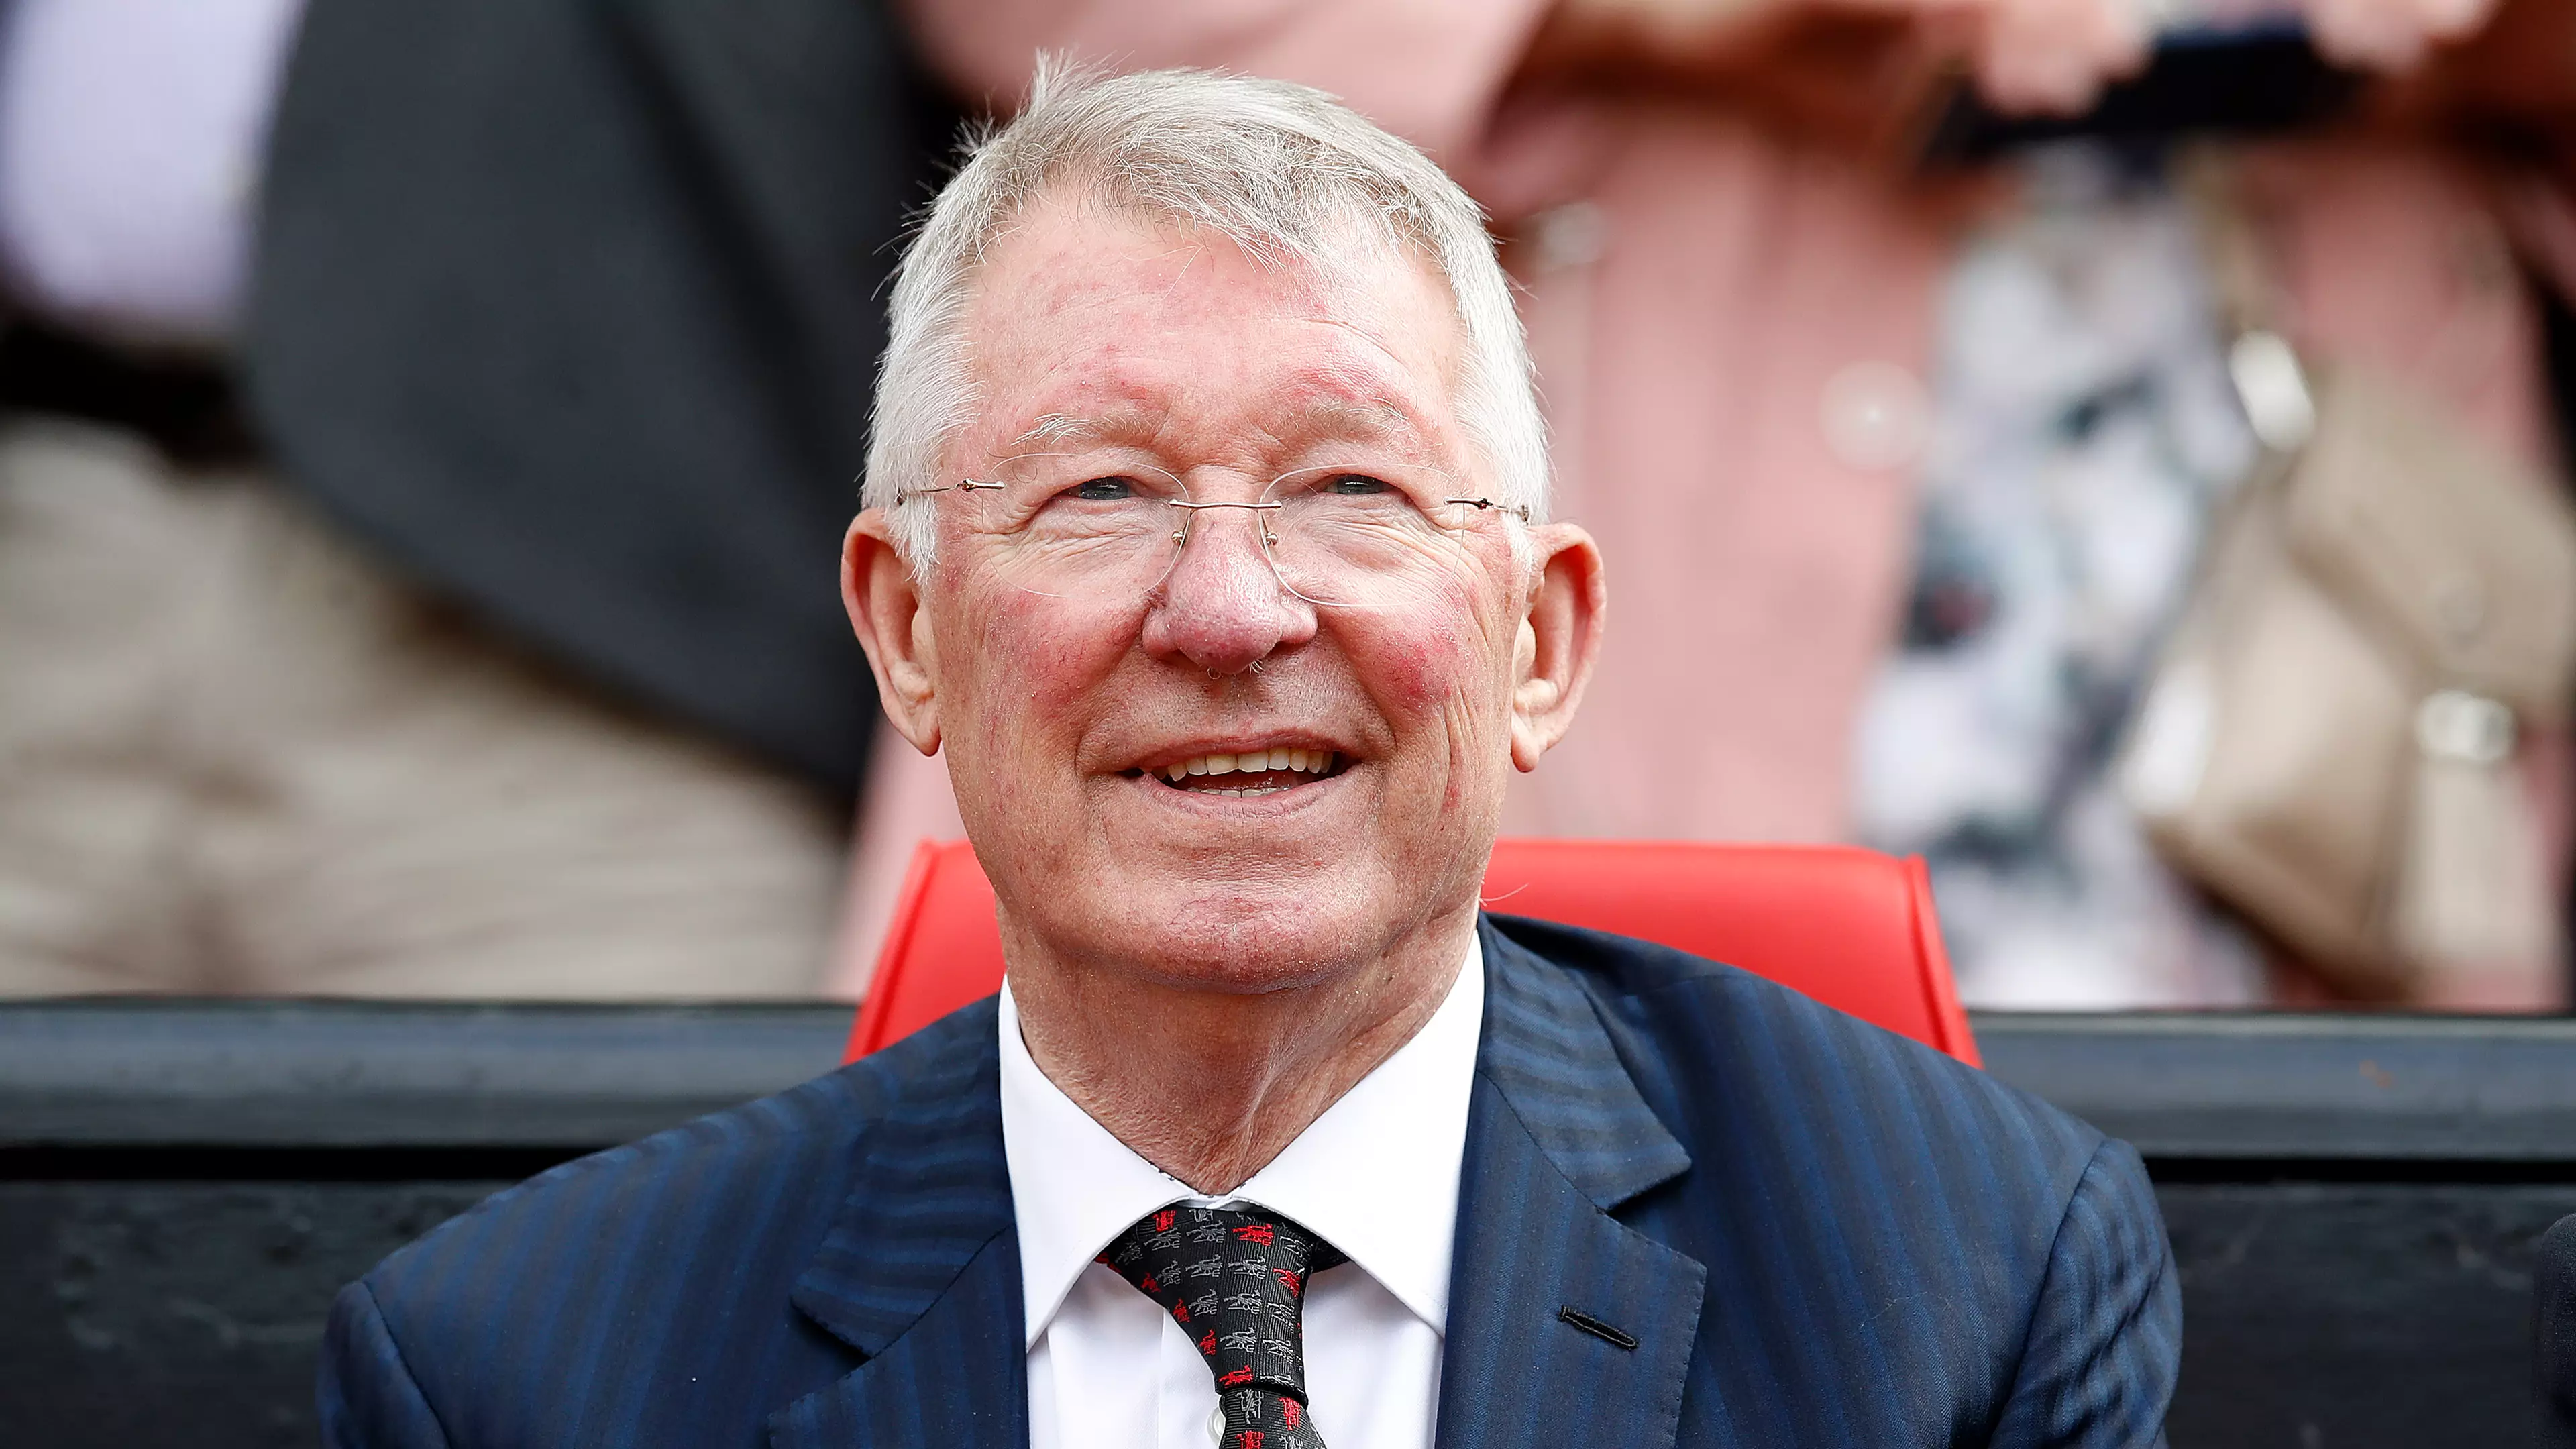 'Corrupt' Football Agent Claims Sir Alex Ferguson Match-Fixed Champions League Game For £30,000 Gold Rolex